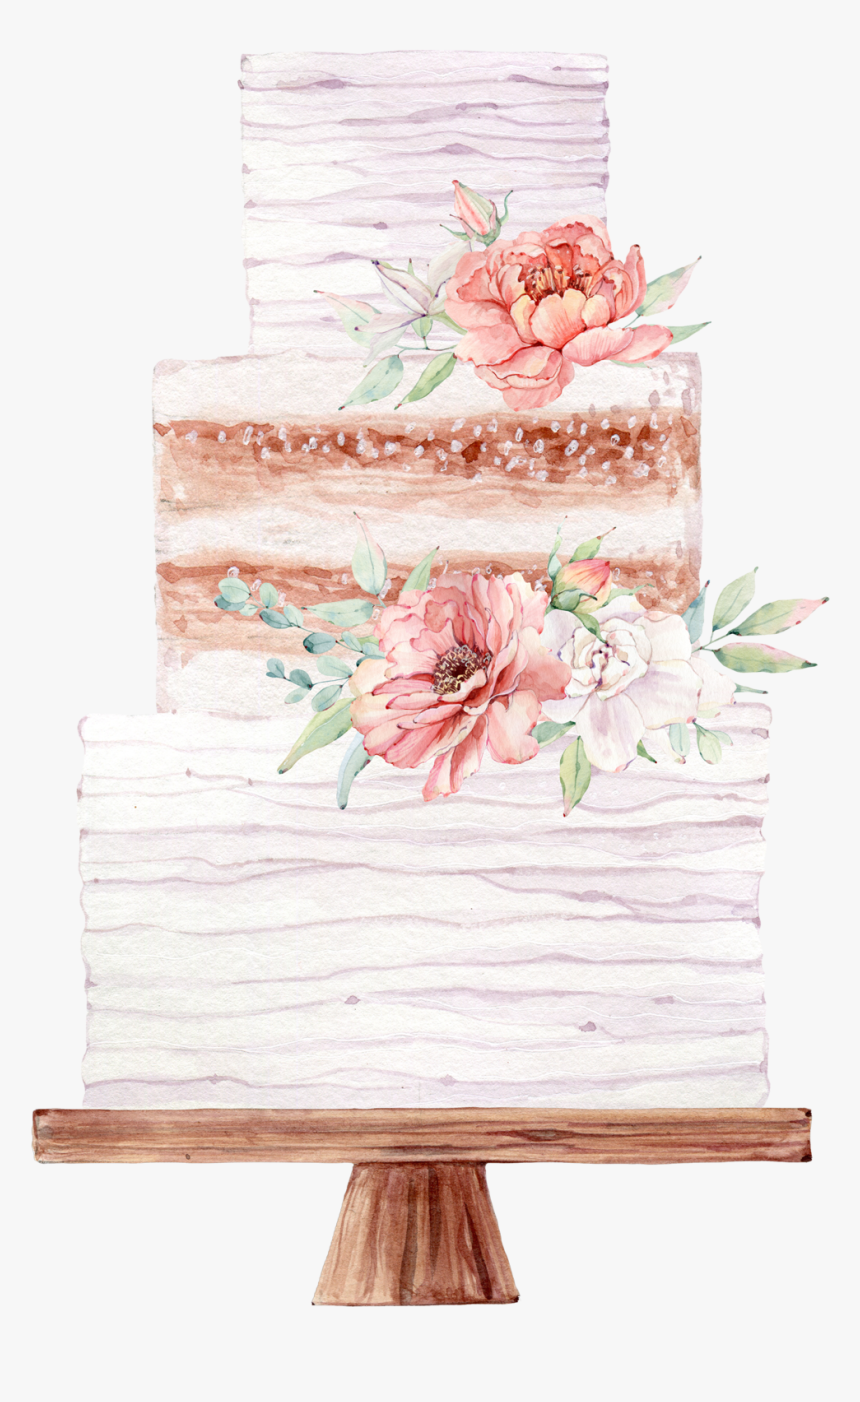 05 - Wedding Cake In Watercolour, HD Png Download, Free Download